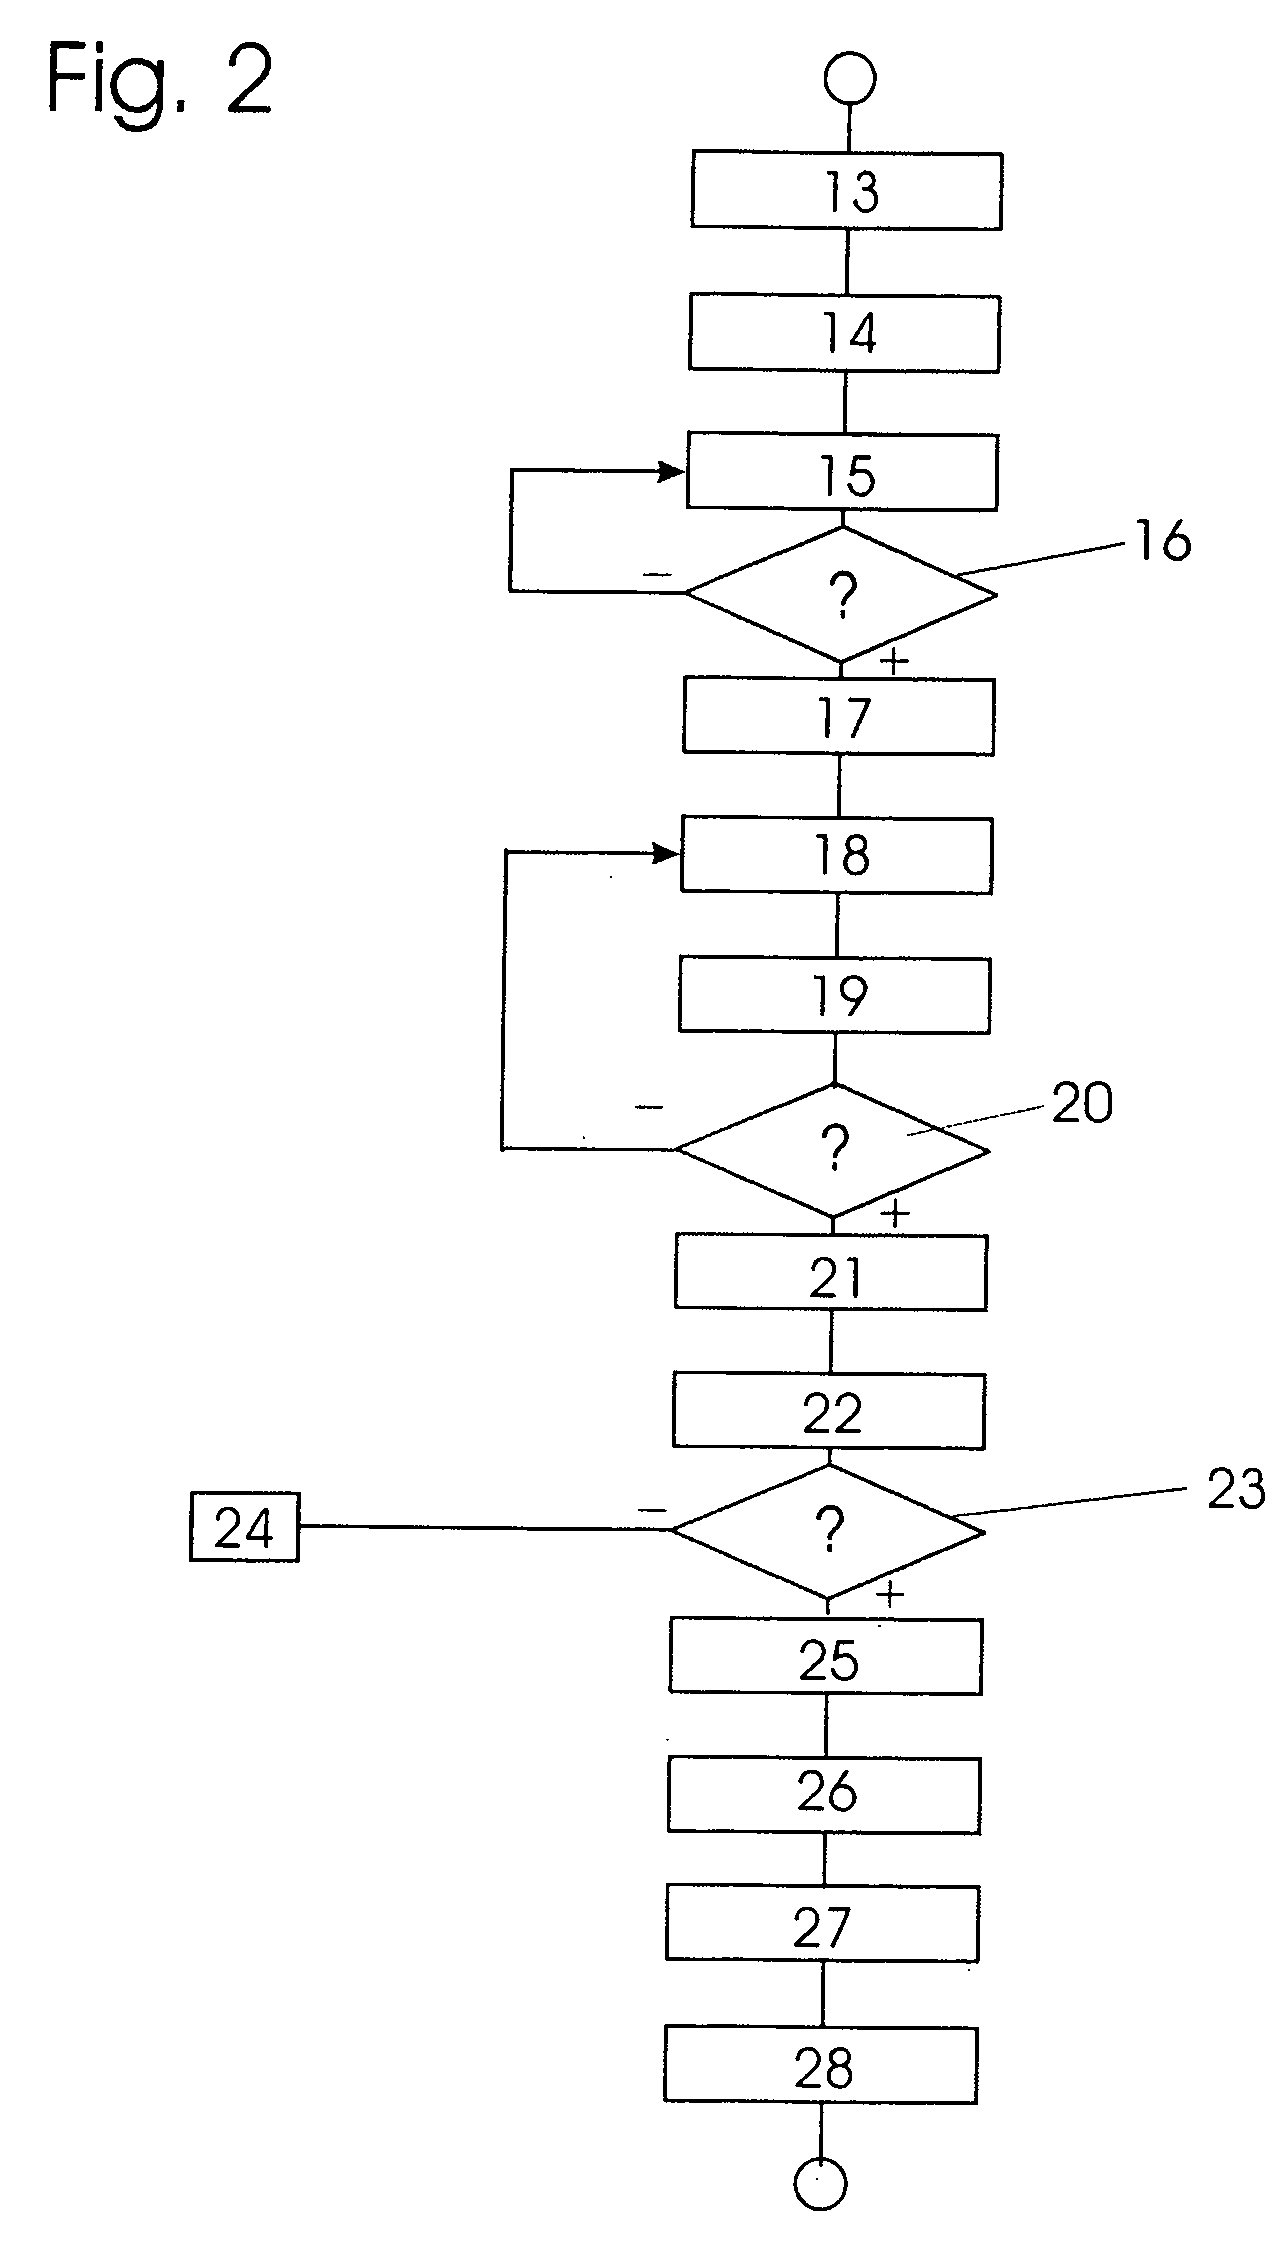 Remote-controlled programming of a program-controlled device